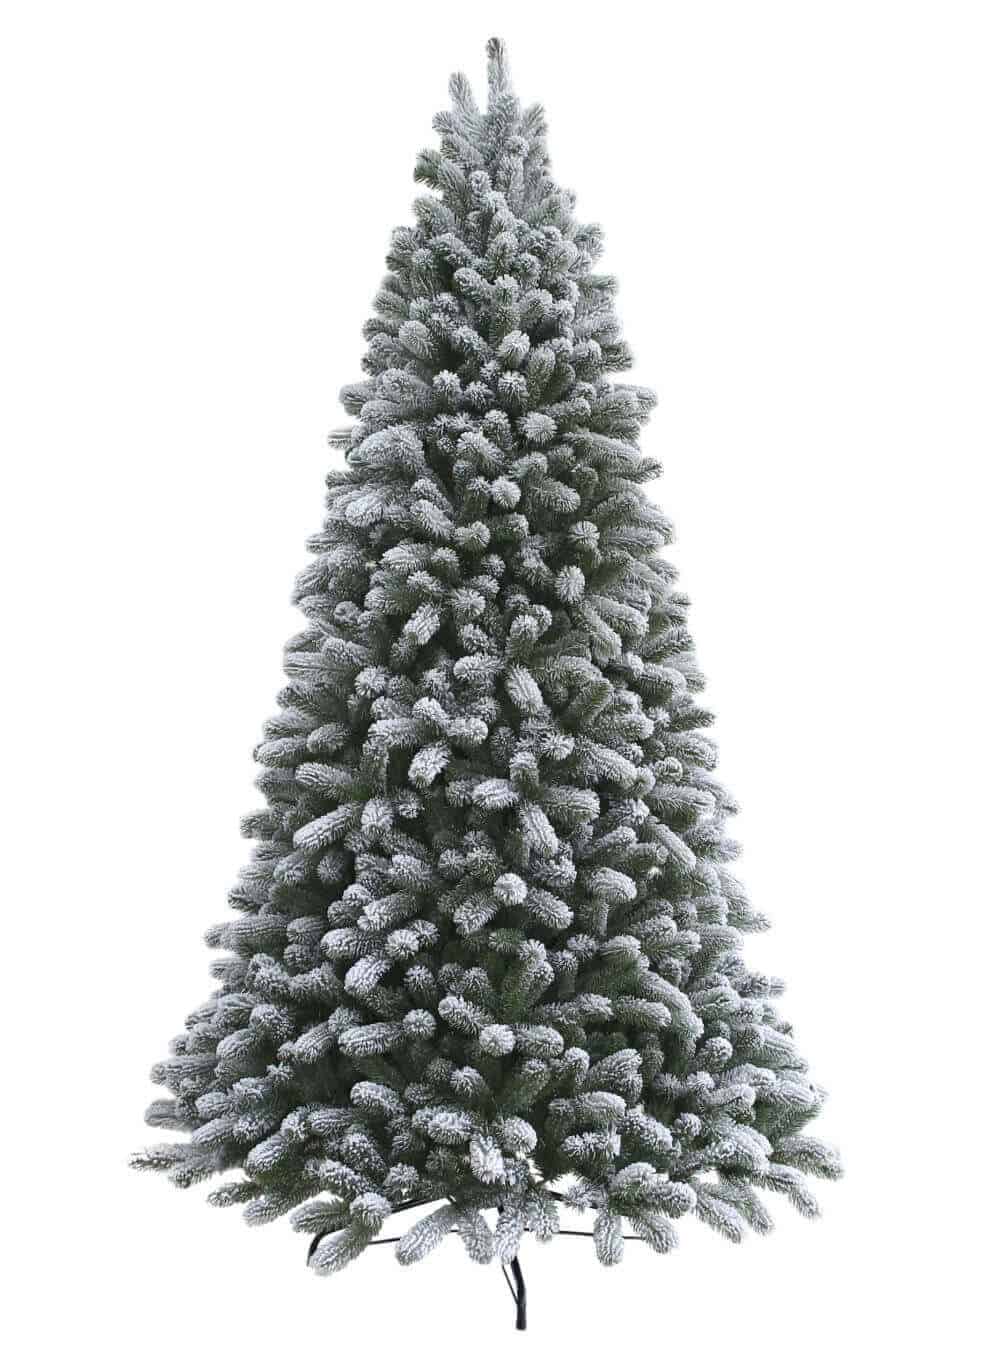 Christmas in July - a King of Christmas tree giveaway!